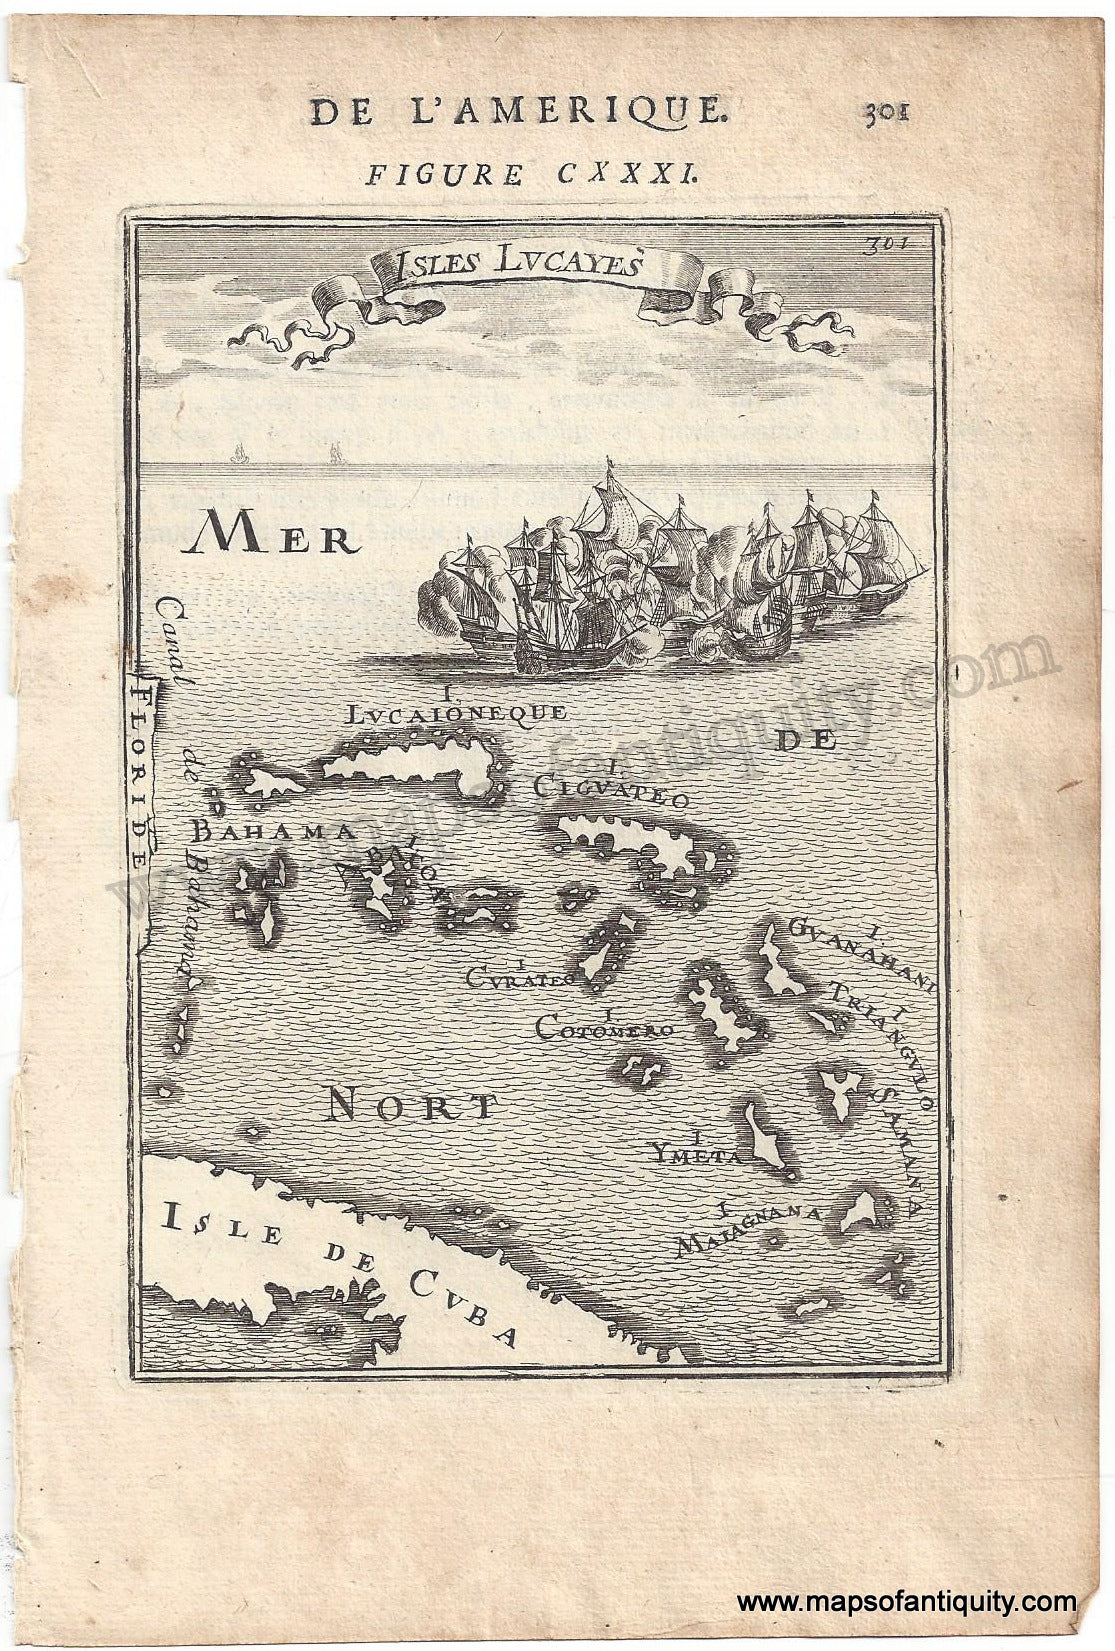 Antique-Copper-Plate-Engraved-Map-Isles-Lucayes-1683-Mallet---1600s-17th-century-Maps-of-Antiquity